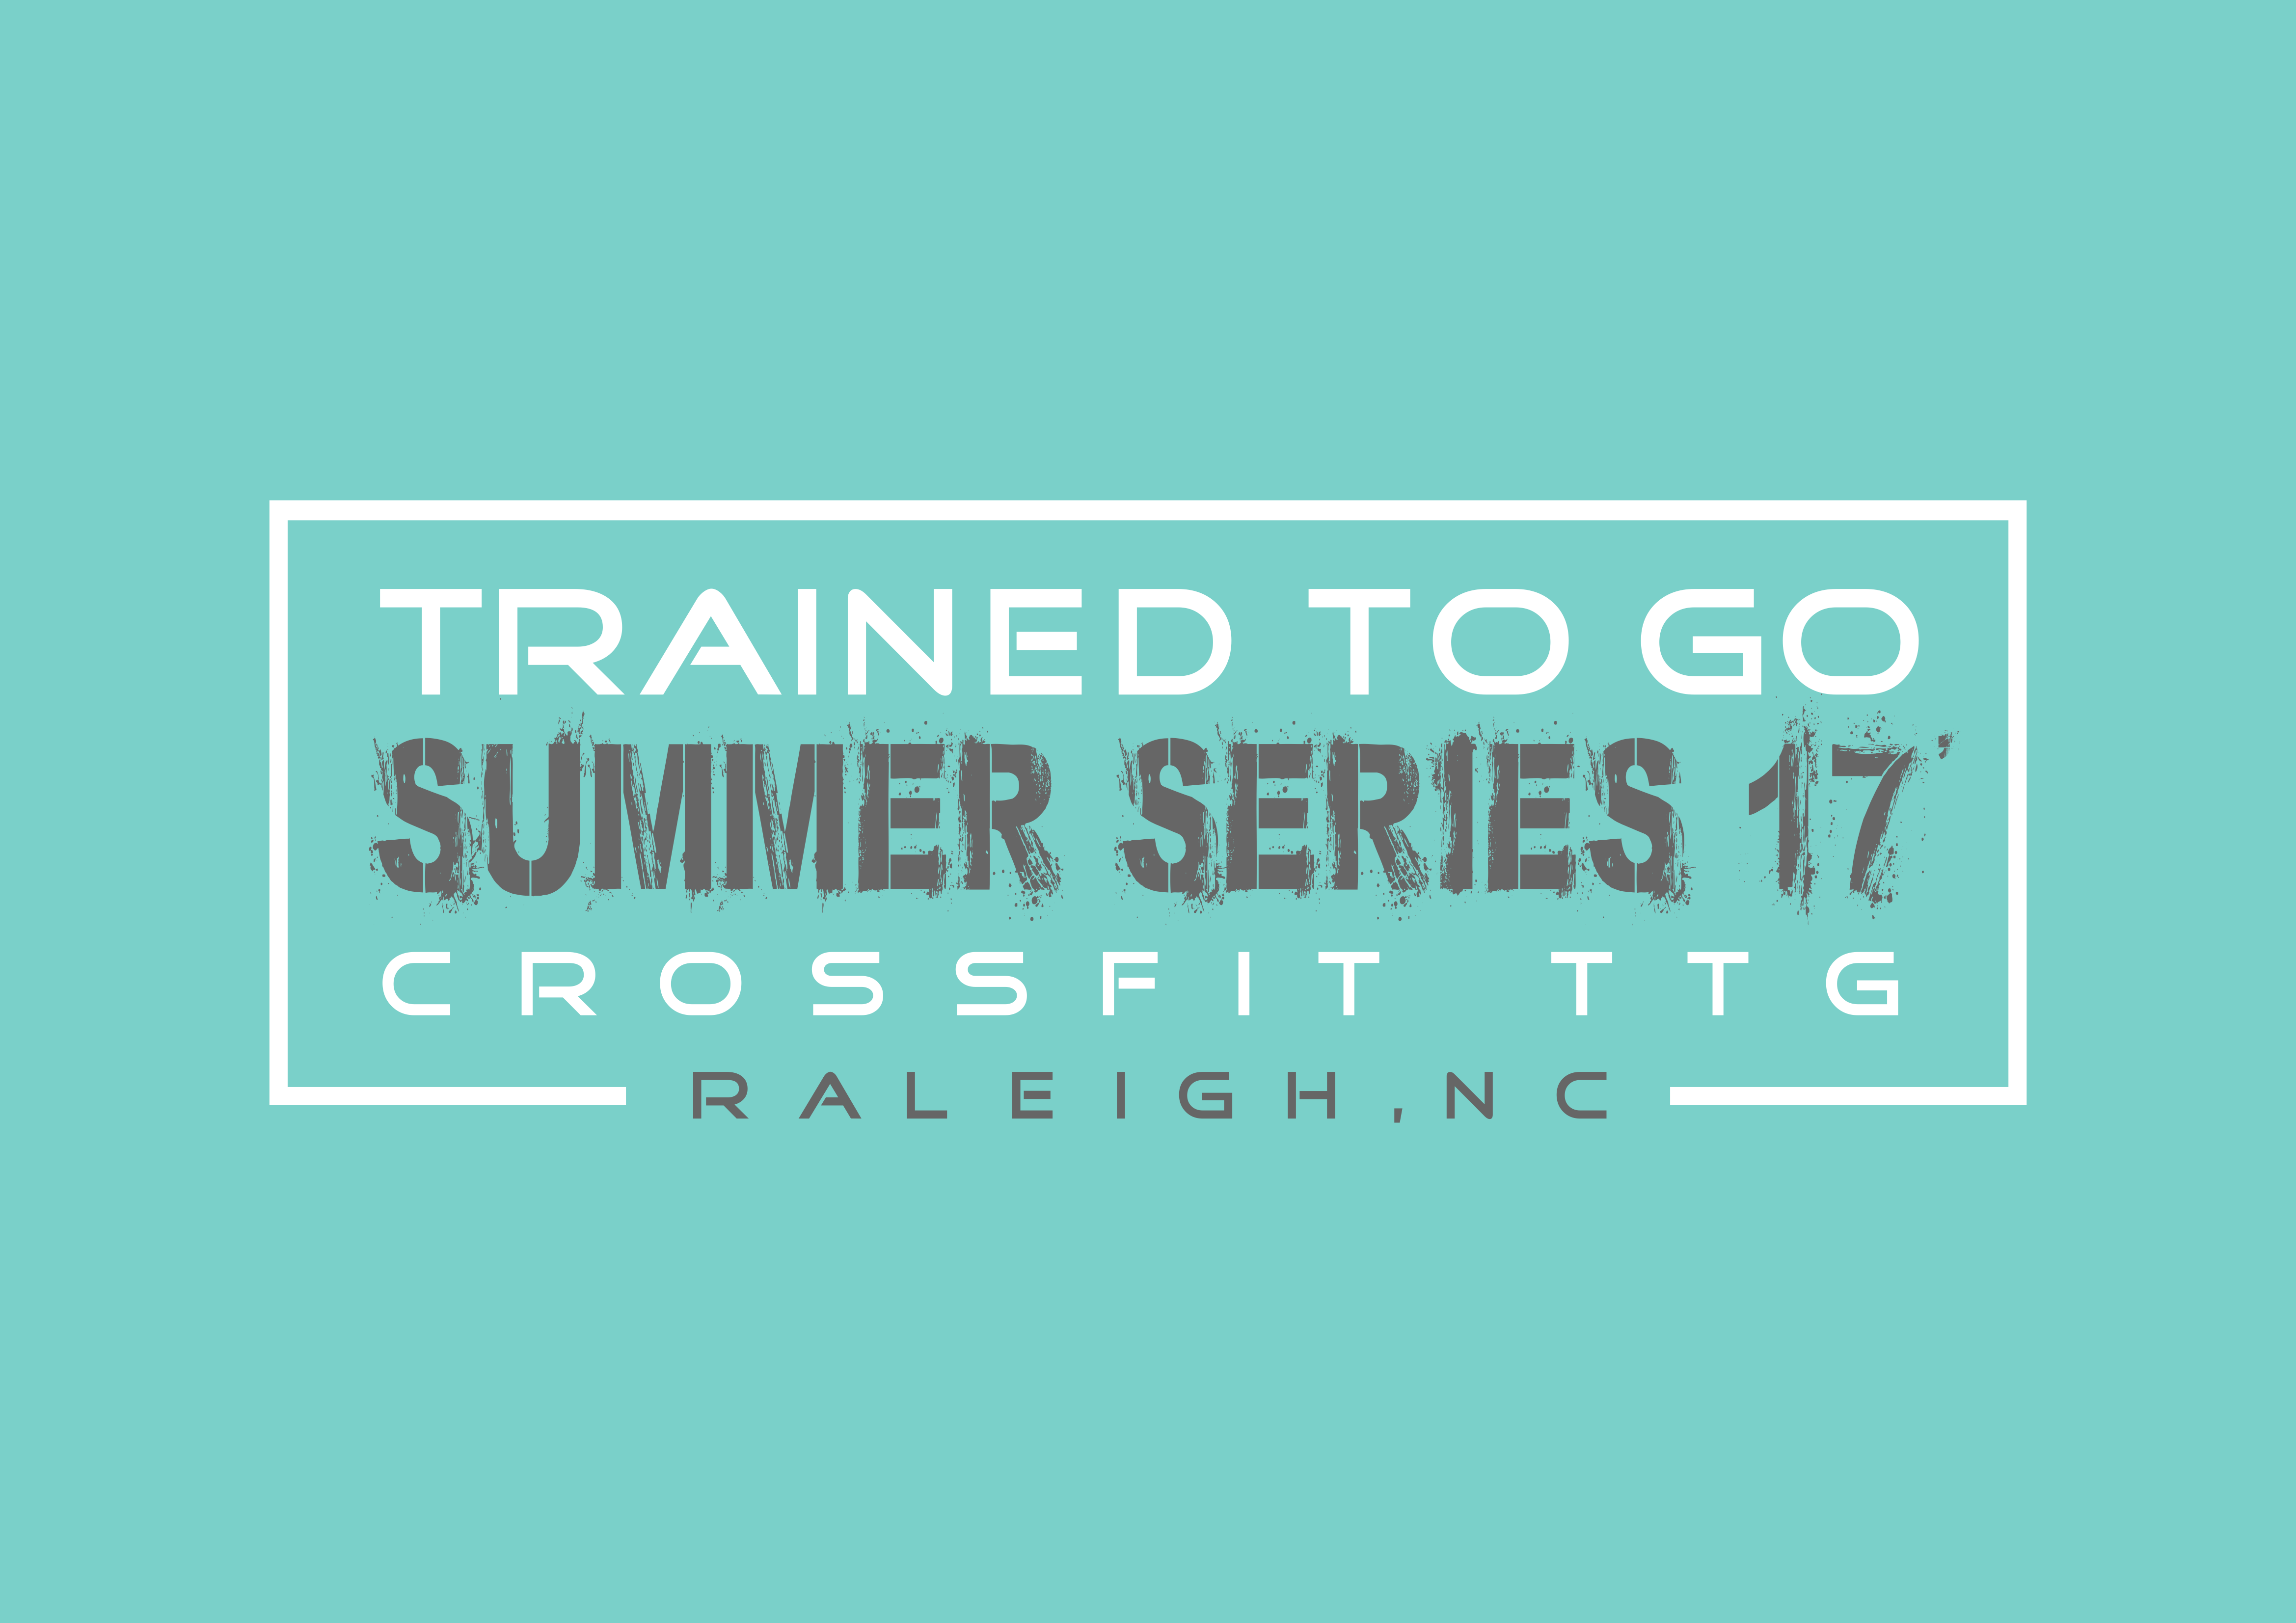 Trained To Go Summer Series '17